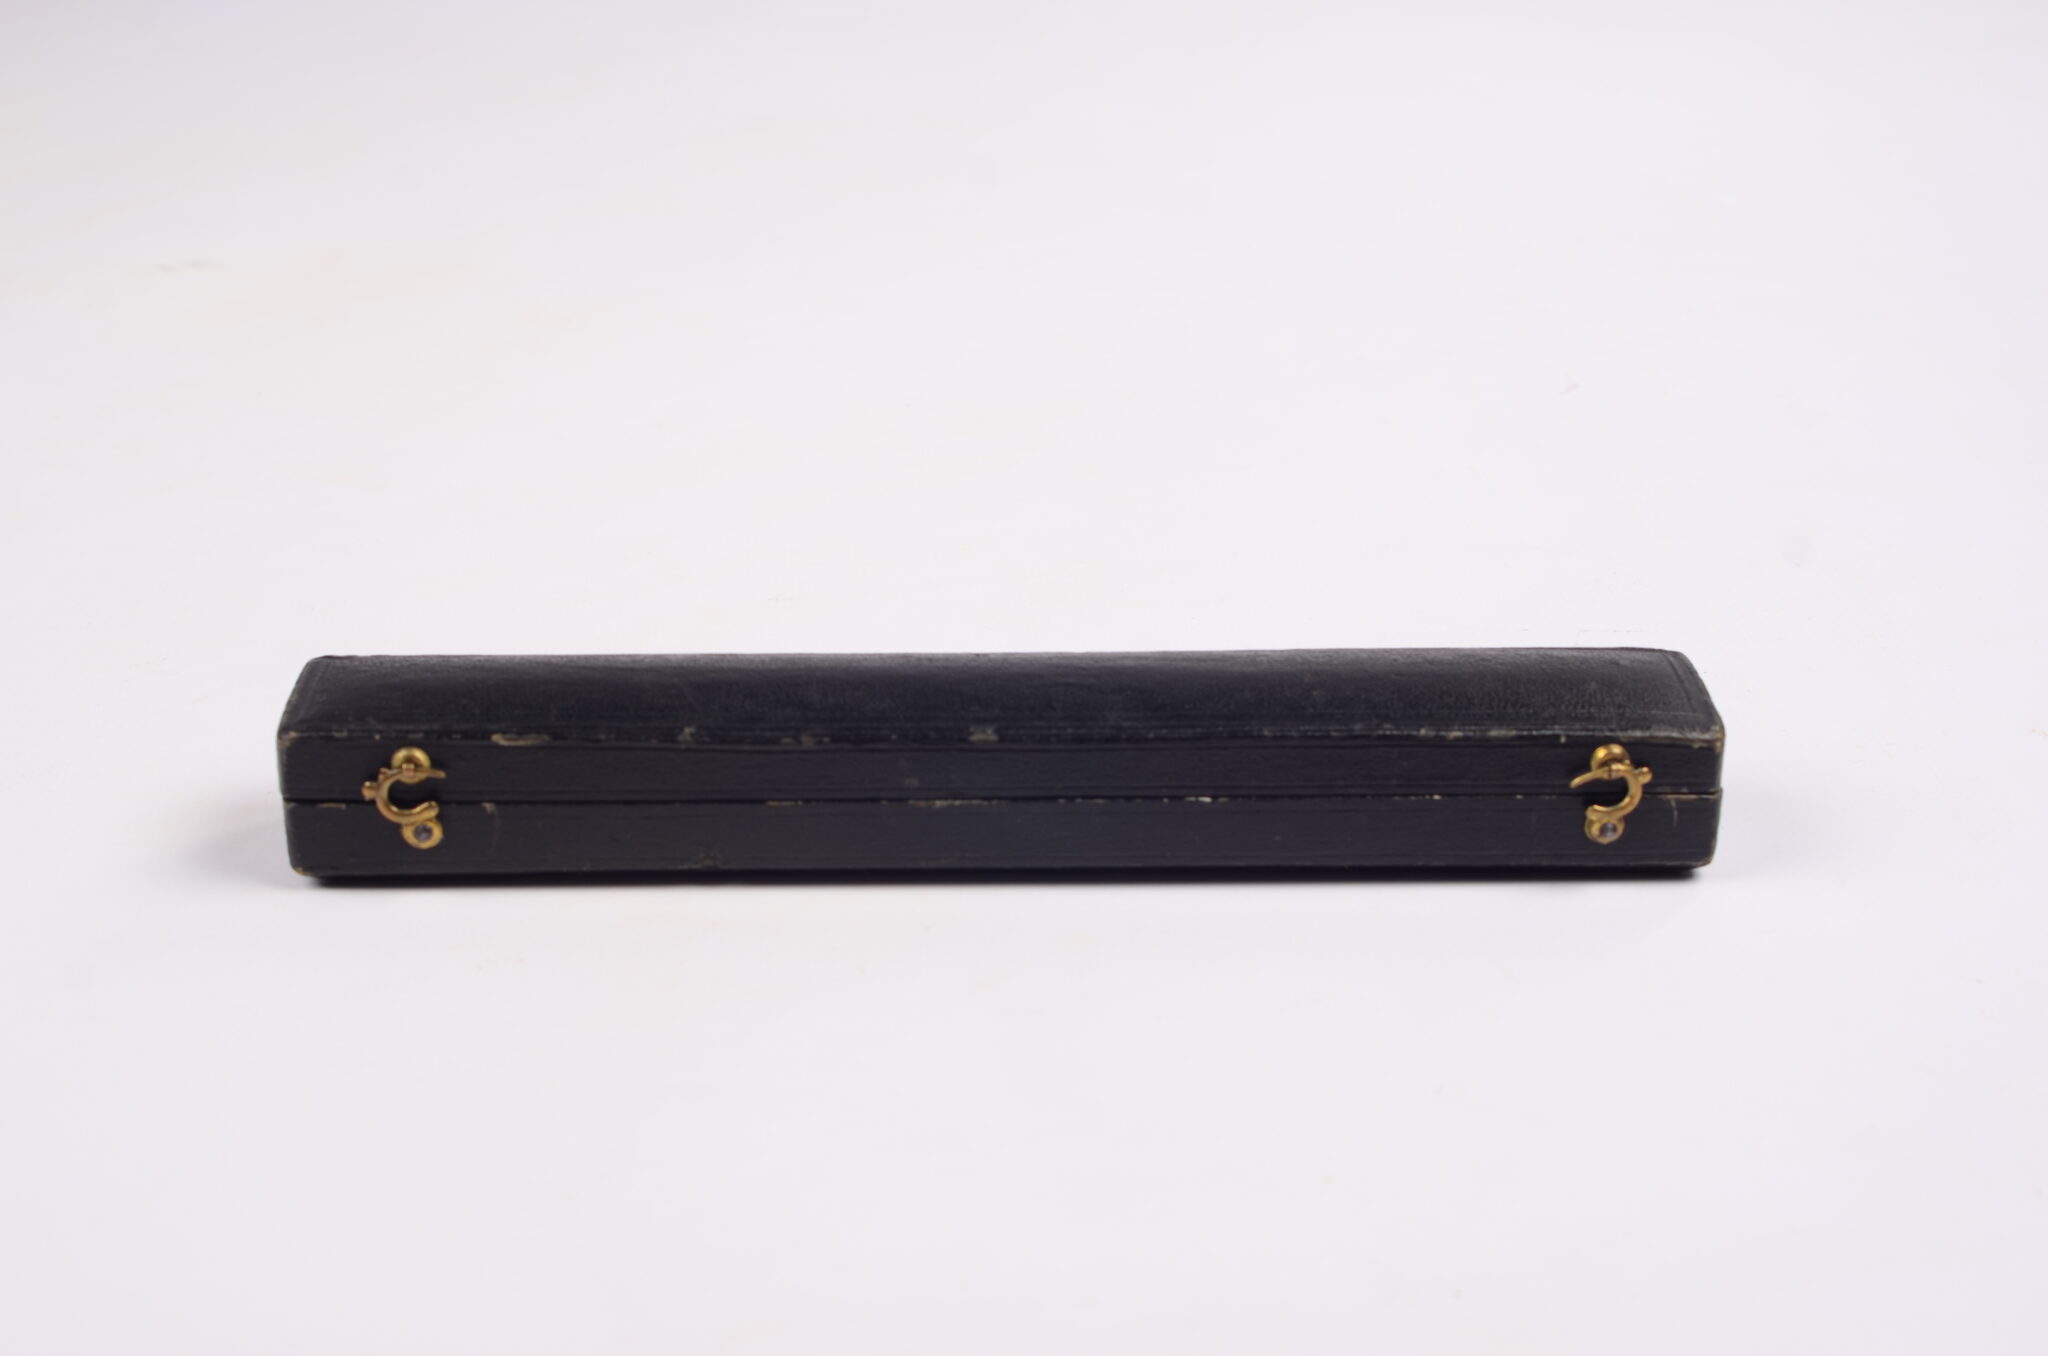 Proportional divider 8 inch – Royer, Paris, ca. 1880